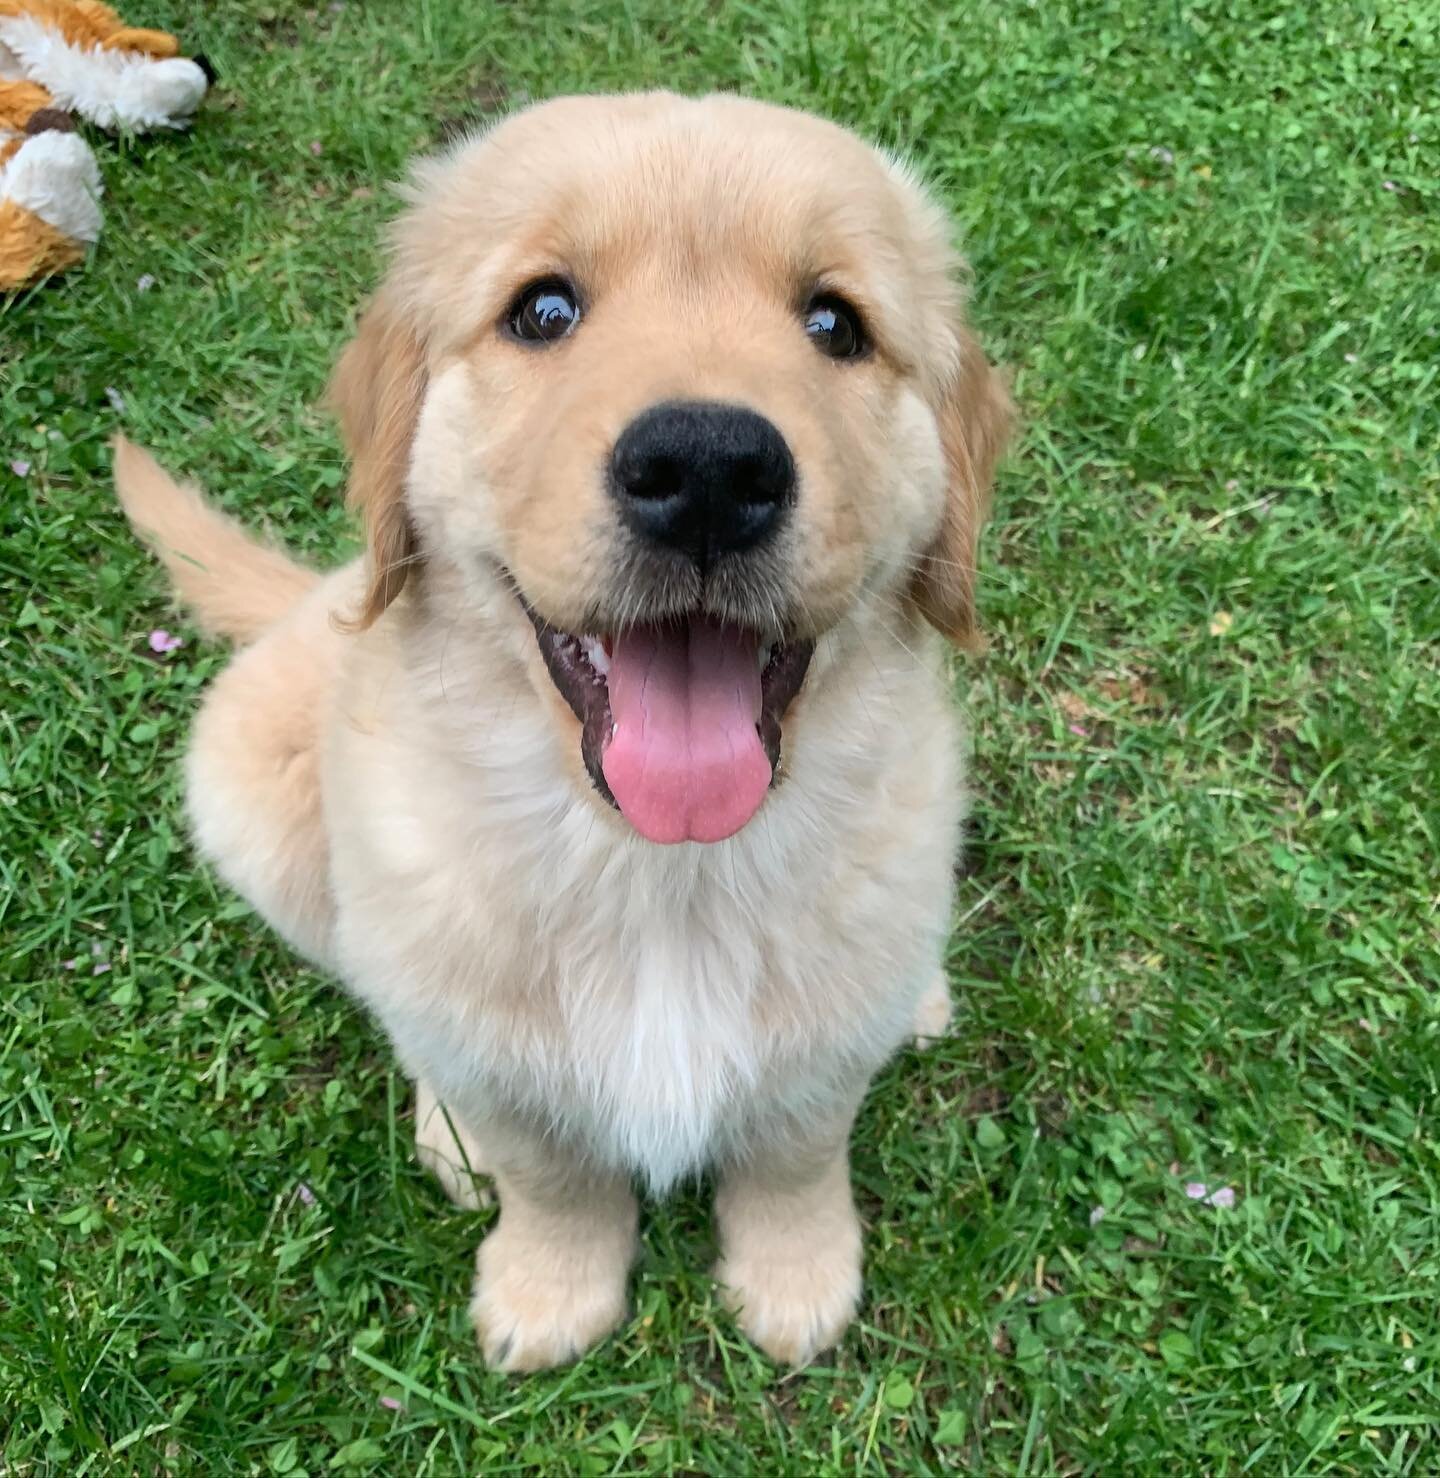 🐶😍 How cute is Riley?!? Keep up the good work, see you soon!

.
.
.

Start training your dog with us today by DMing us or text/call us (201) 983-7699 to schedule a free consultation

.
.
.

#ObedientK9 #NJdogtrainer #Dogtraining #dog #goldenretriev